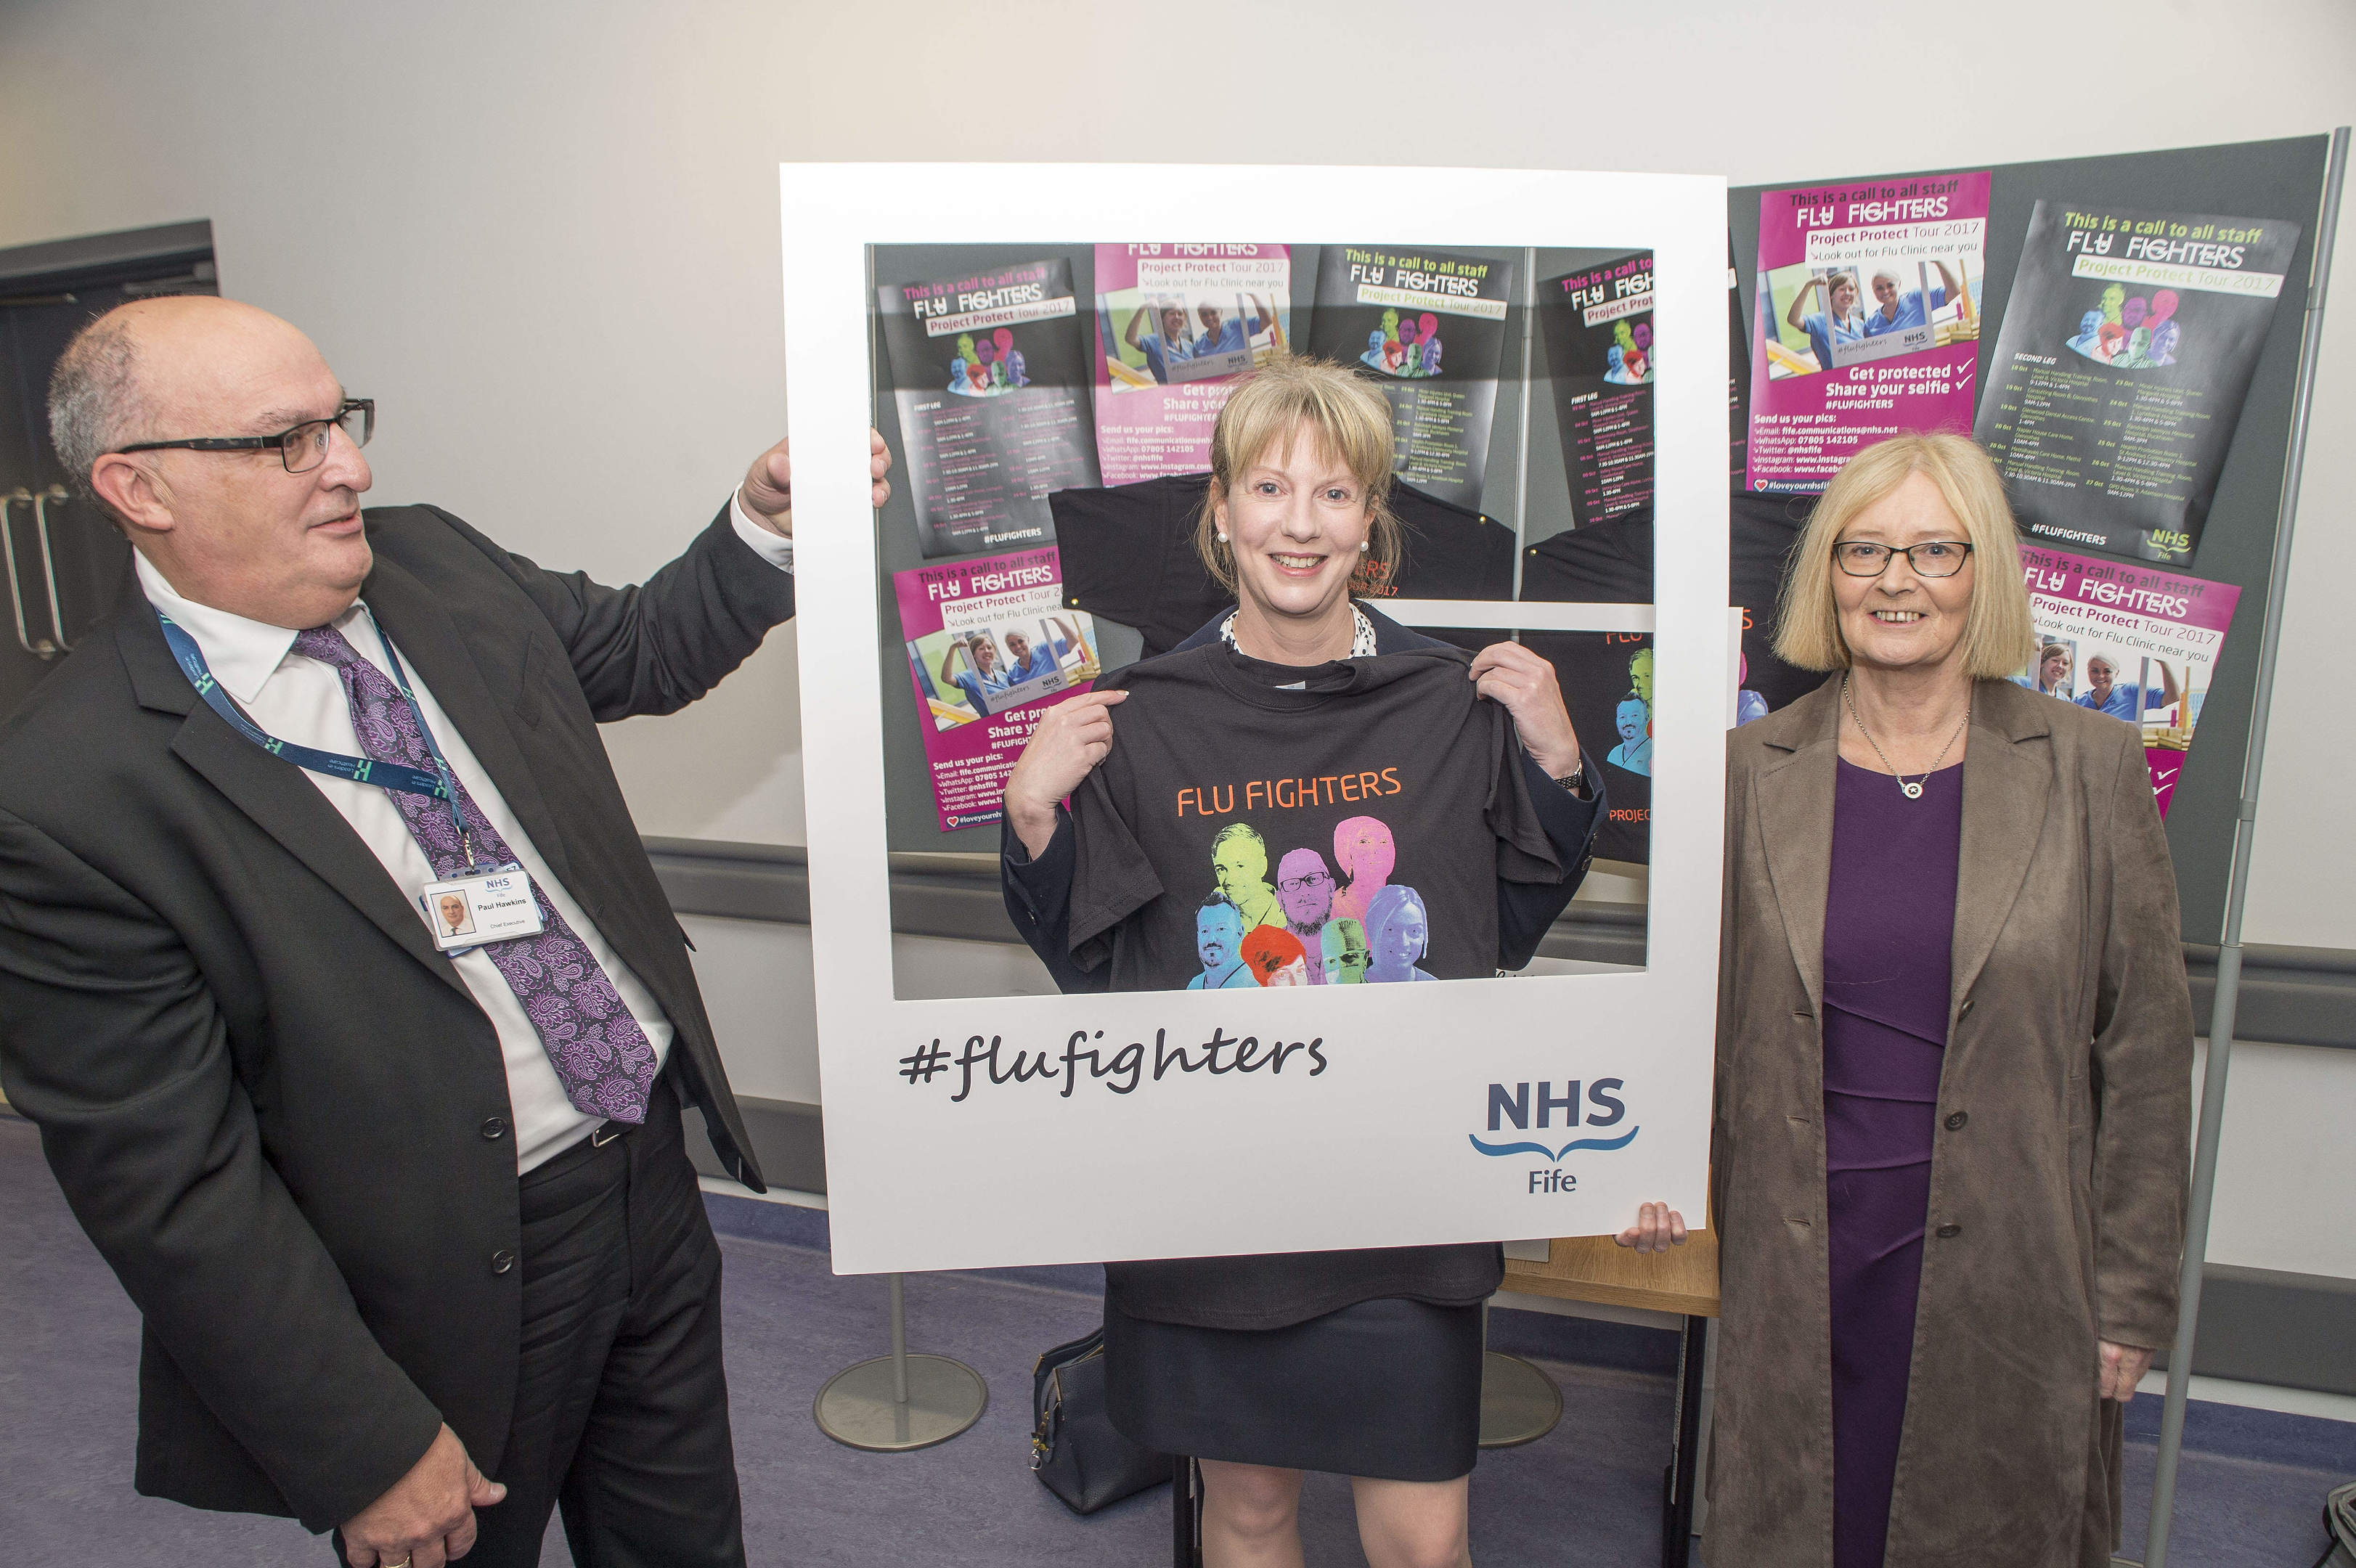 Scottish Health Secretary Shona Robison joined NHS Fife Chief Executive Paul Hawkins and Chair of NHS Fife Tricia Marwick in their Flu Fighters campaign during a visit to the Victoria Hospital in Kirkcaldy.